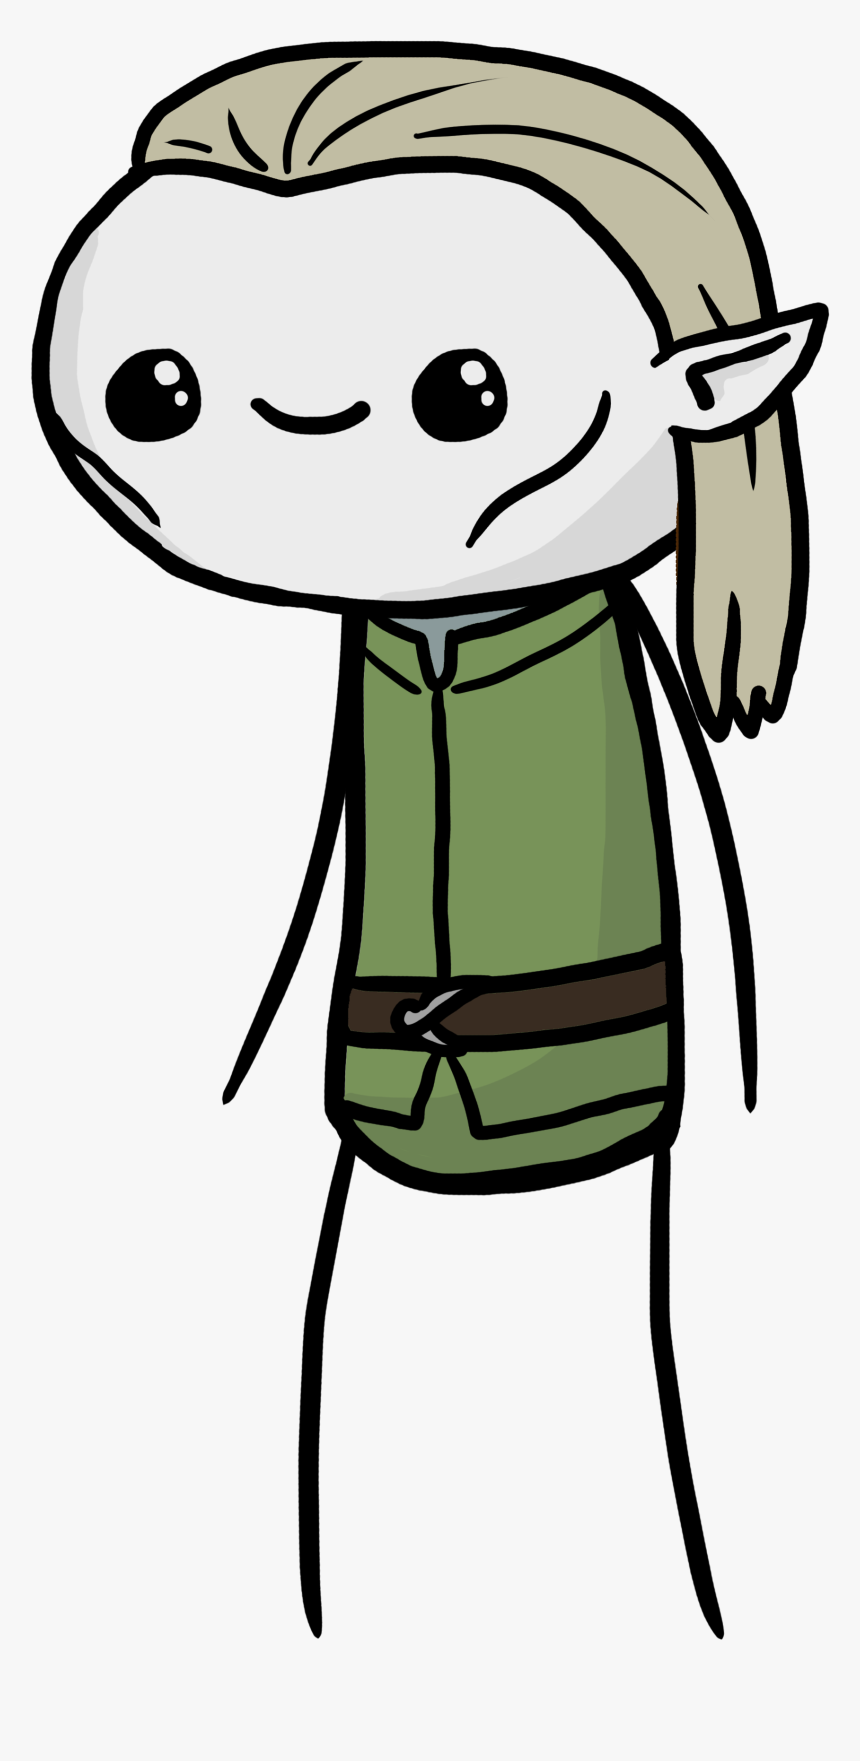 Legolas From "lord Of The Rings" - Cartoon, HD Png Download, Free Download